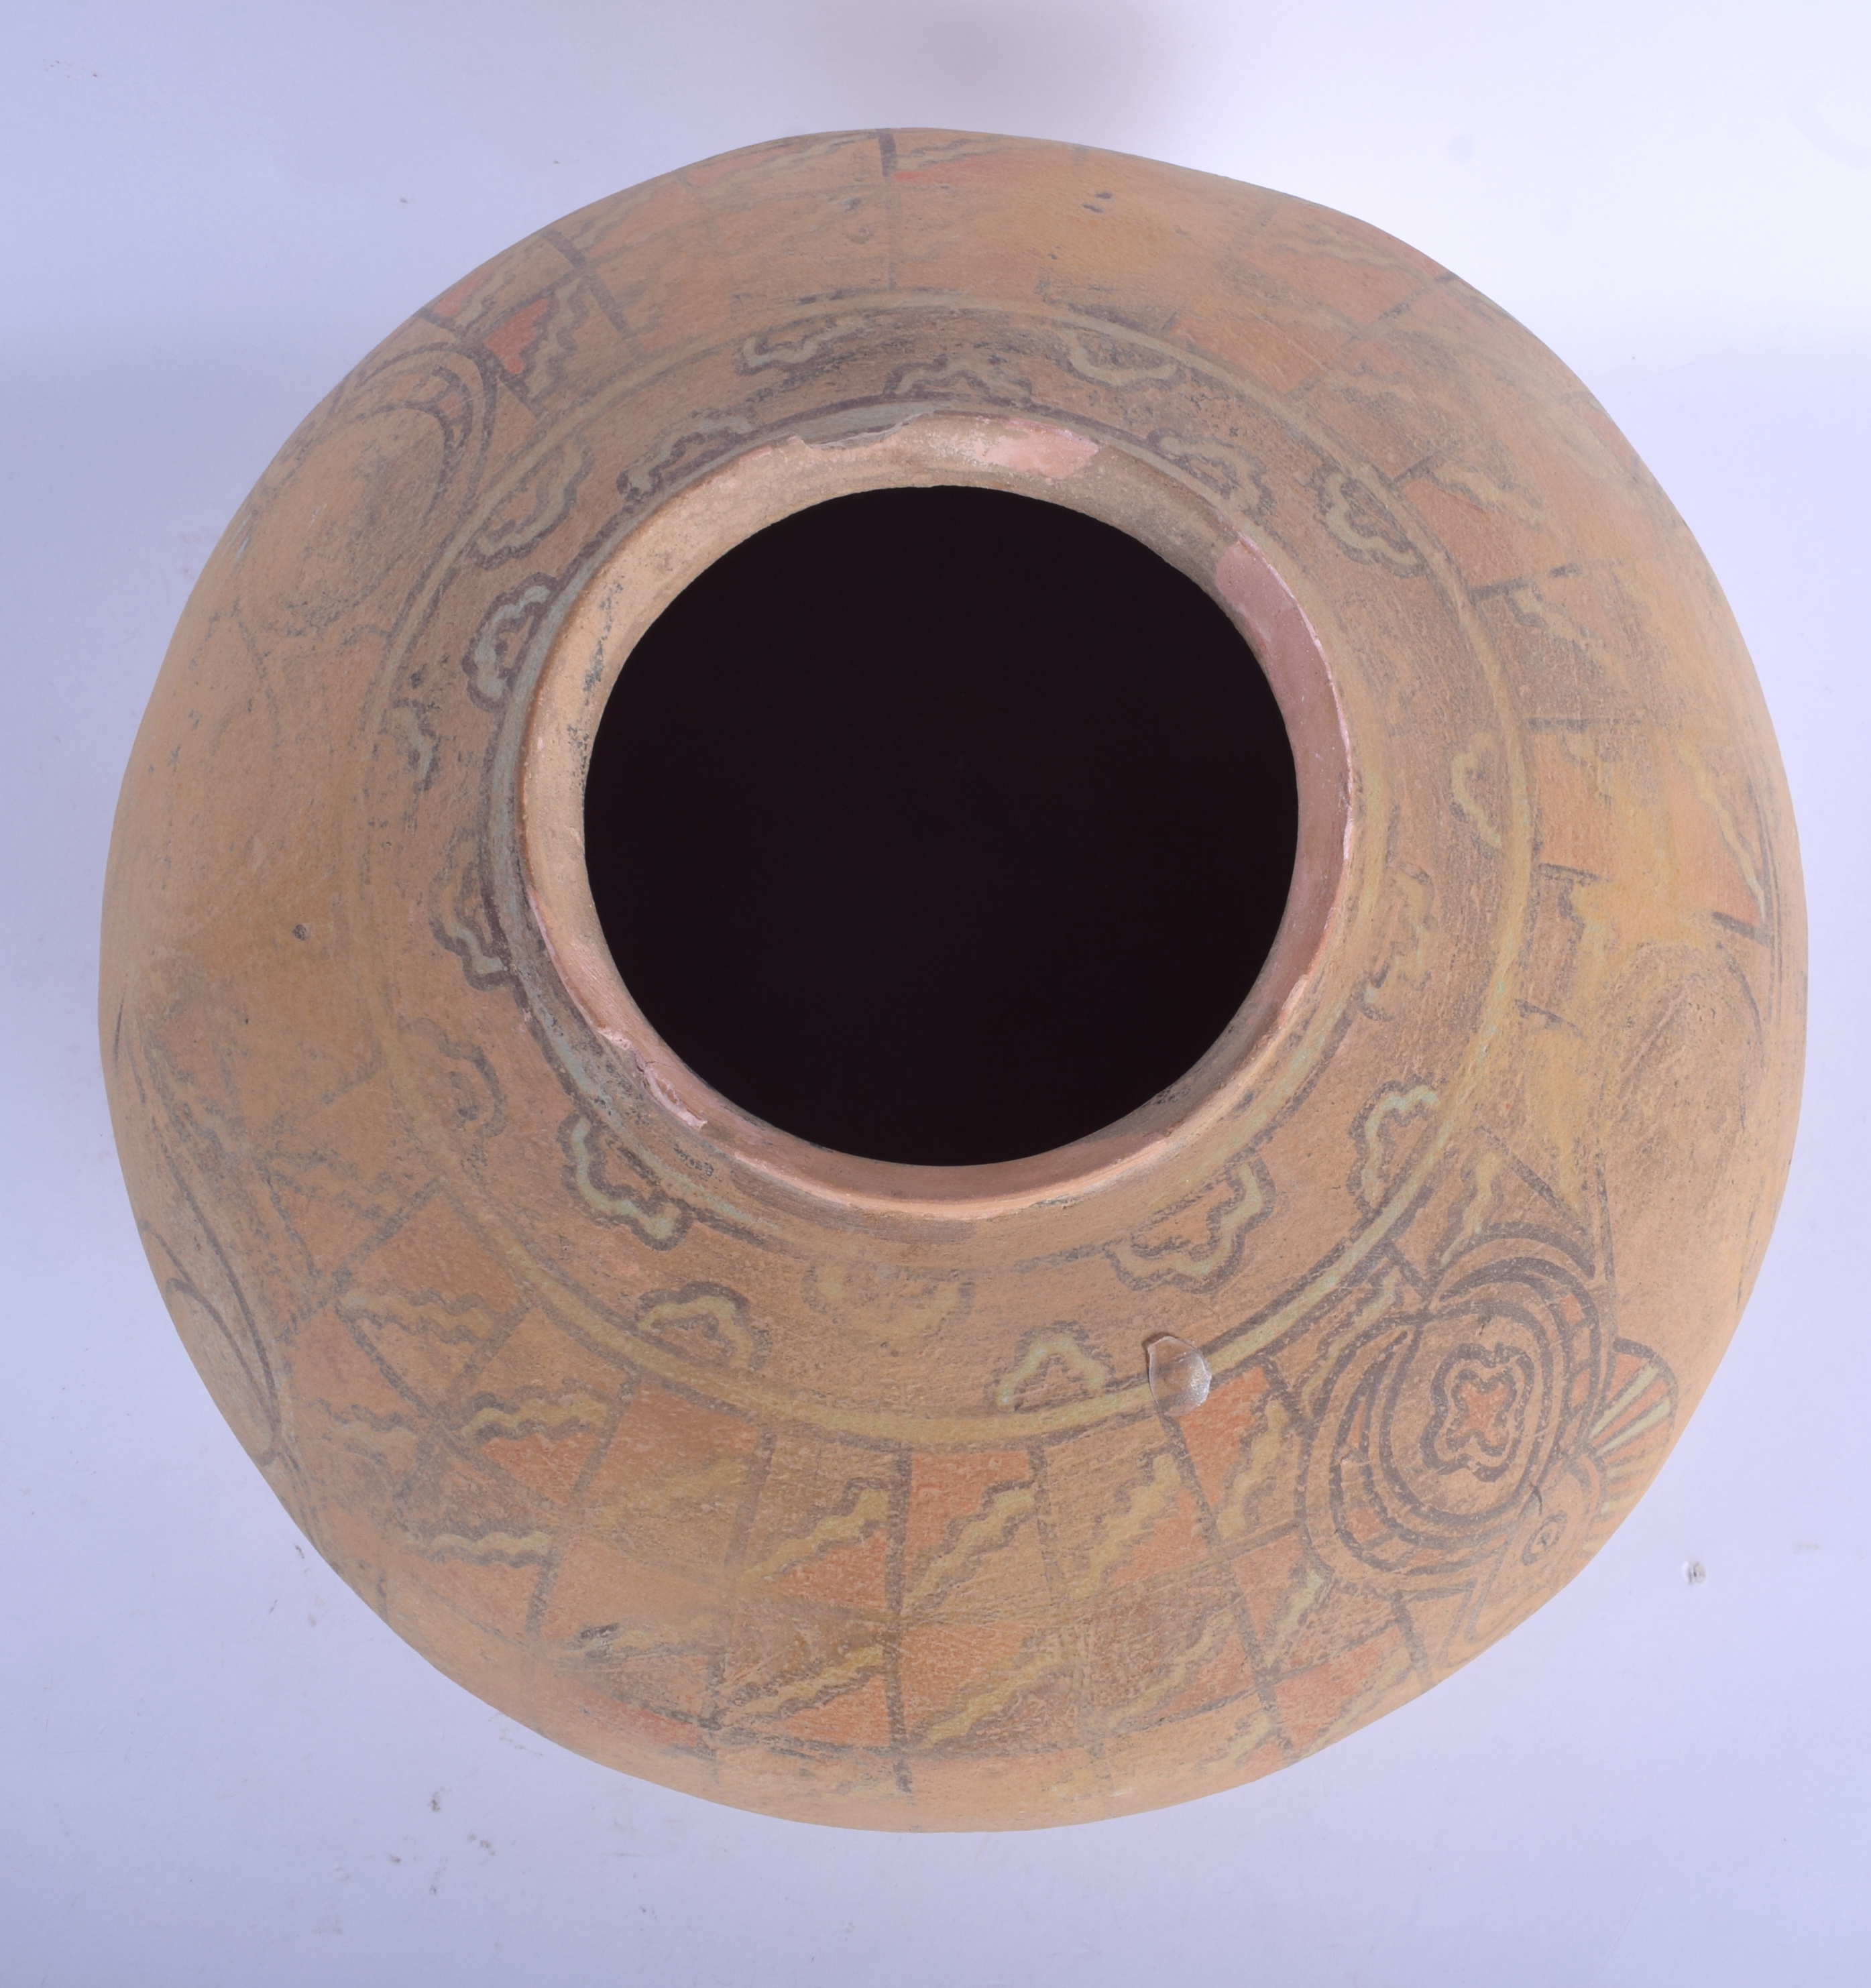 A LARGE INDUS VALLEY CARVED TERRACOTTA POTTERY VASE painted with motifs. 26 cm x 24 cm. - Image 2 of 3